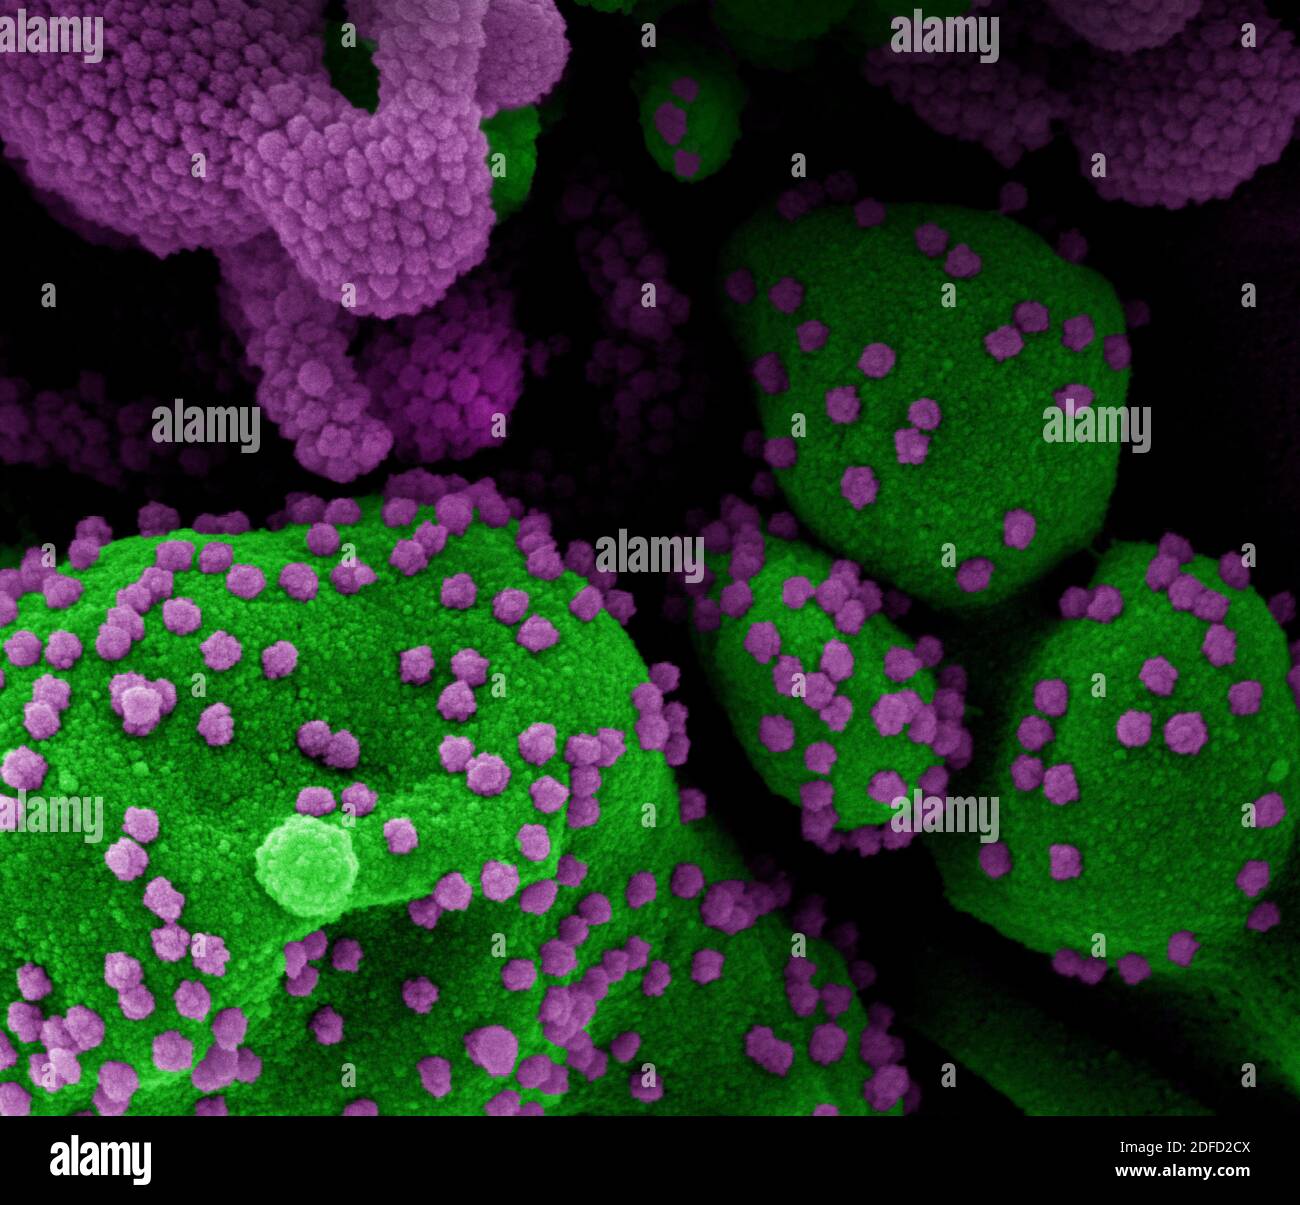 Colorized scanning electron micrograph of an apoptotic cell (green) heavily infected with SARS-CoV-2 virus particles (purple), isolated from a patient Stock Photo